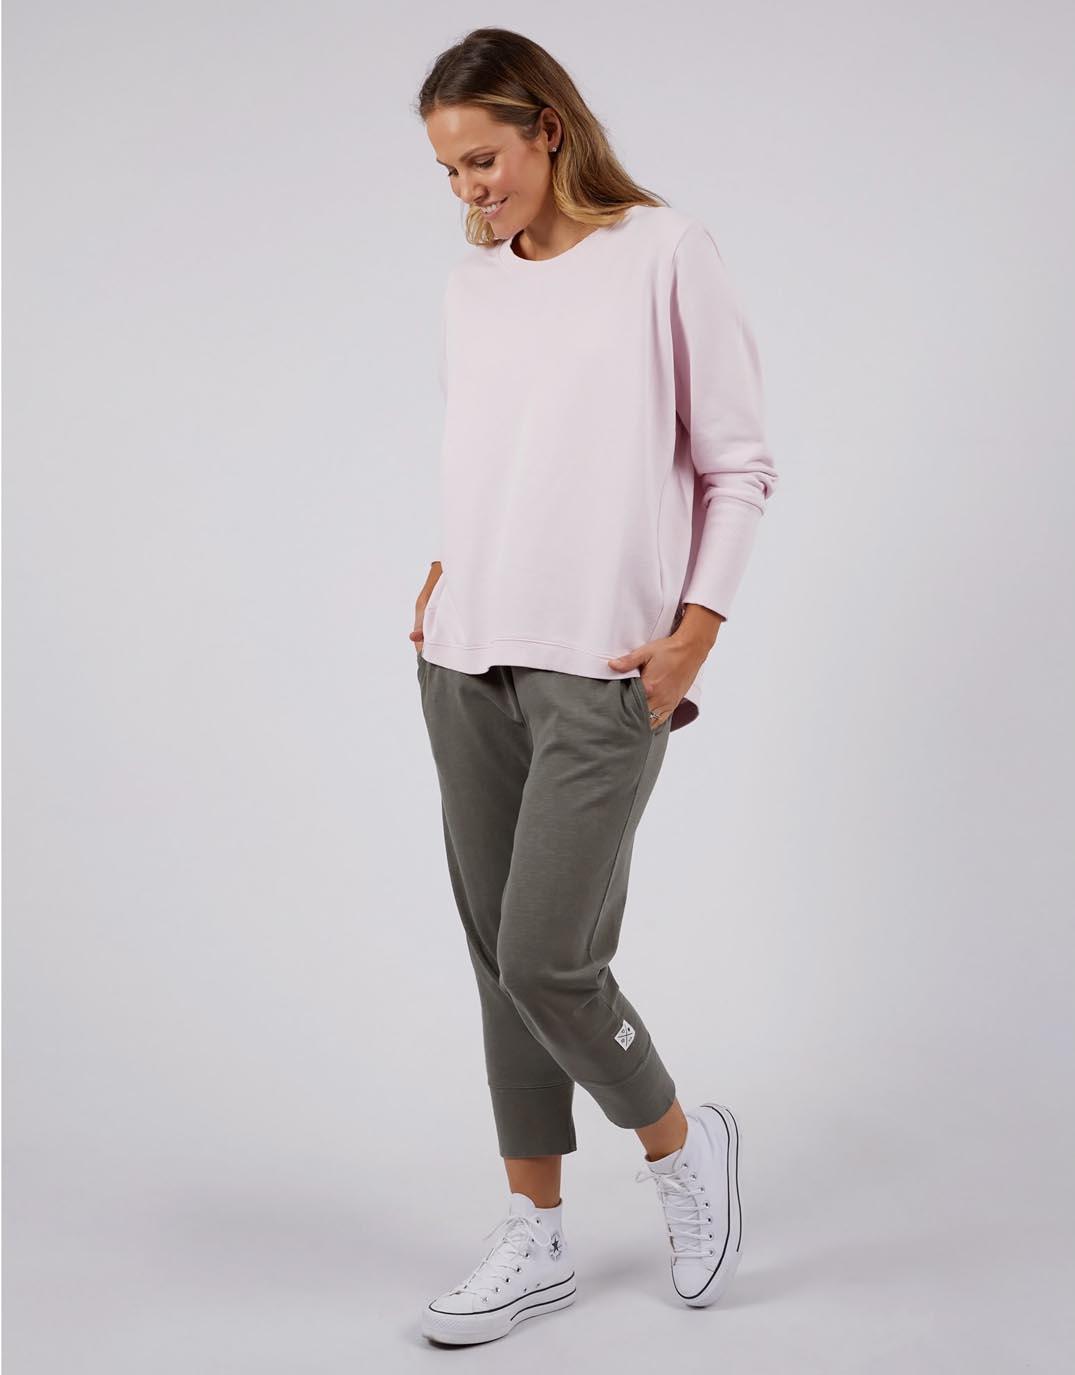 Elm - Divine Crew - Powder Pink - White & Co Living Jumpers